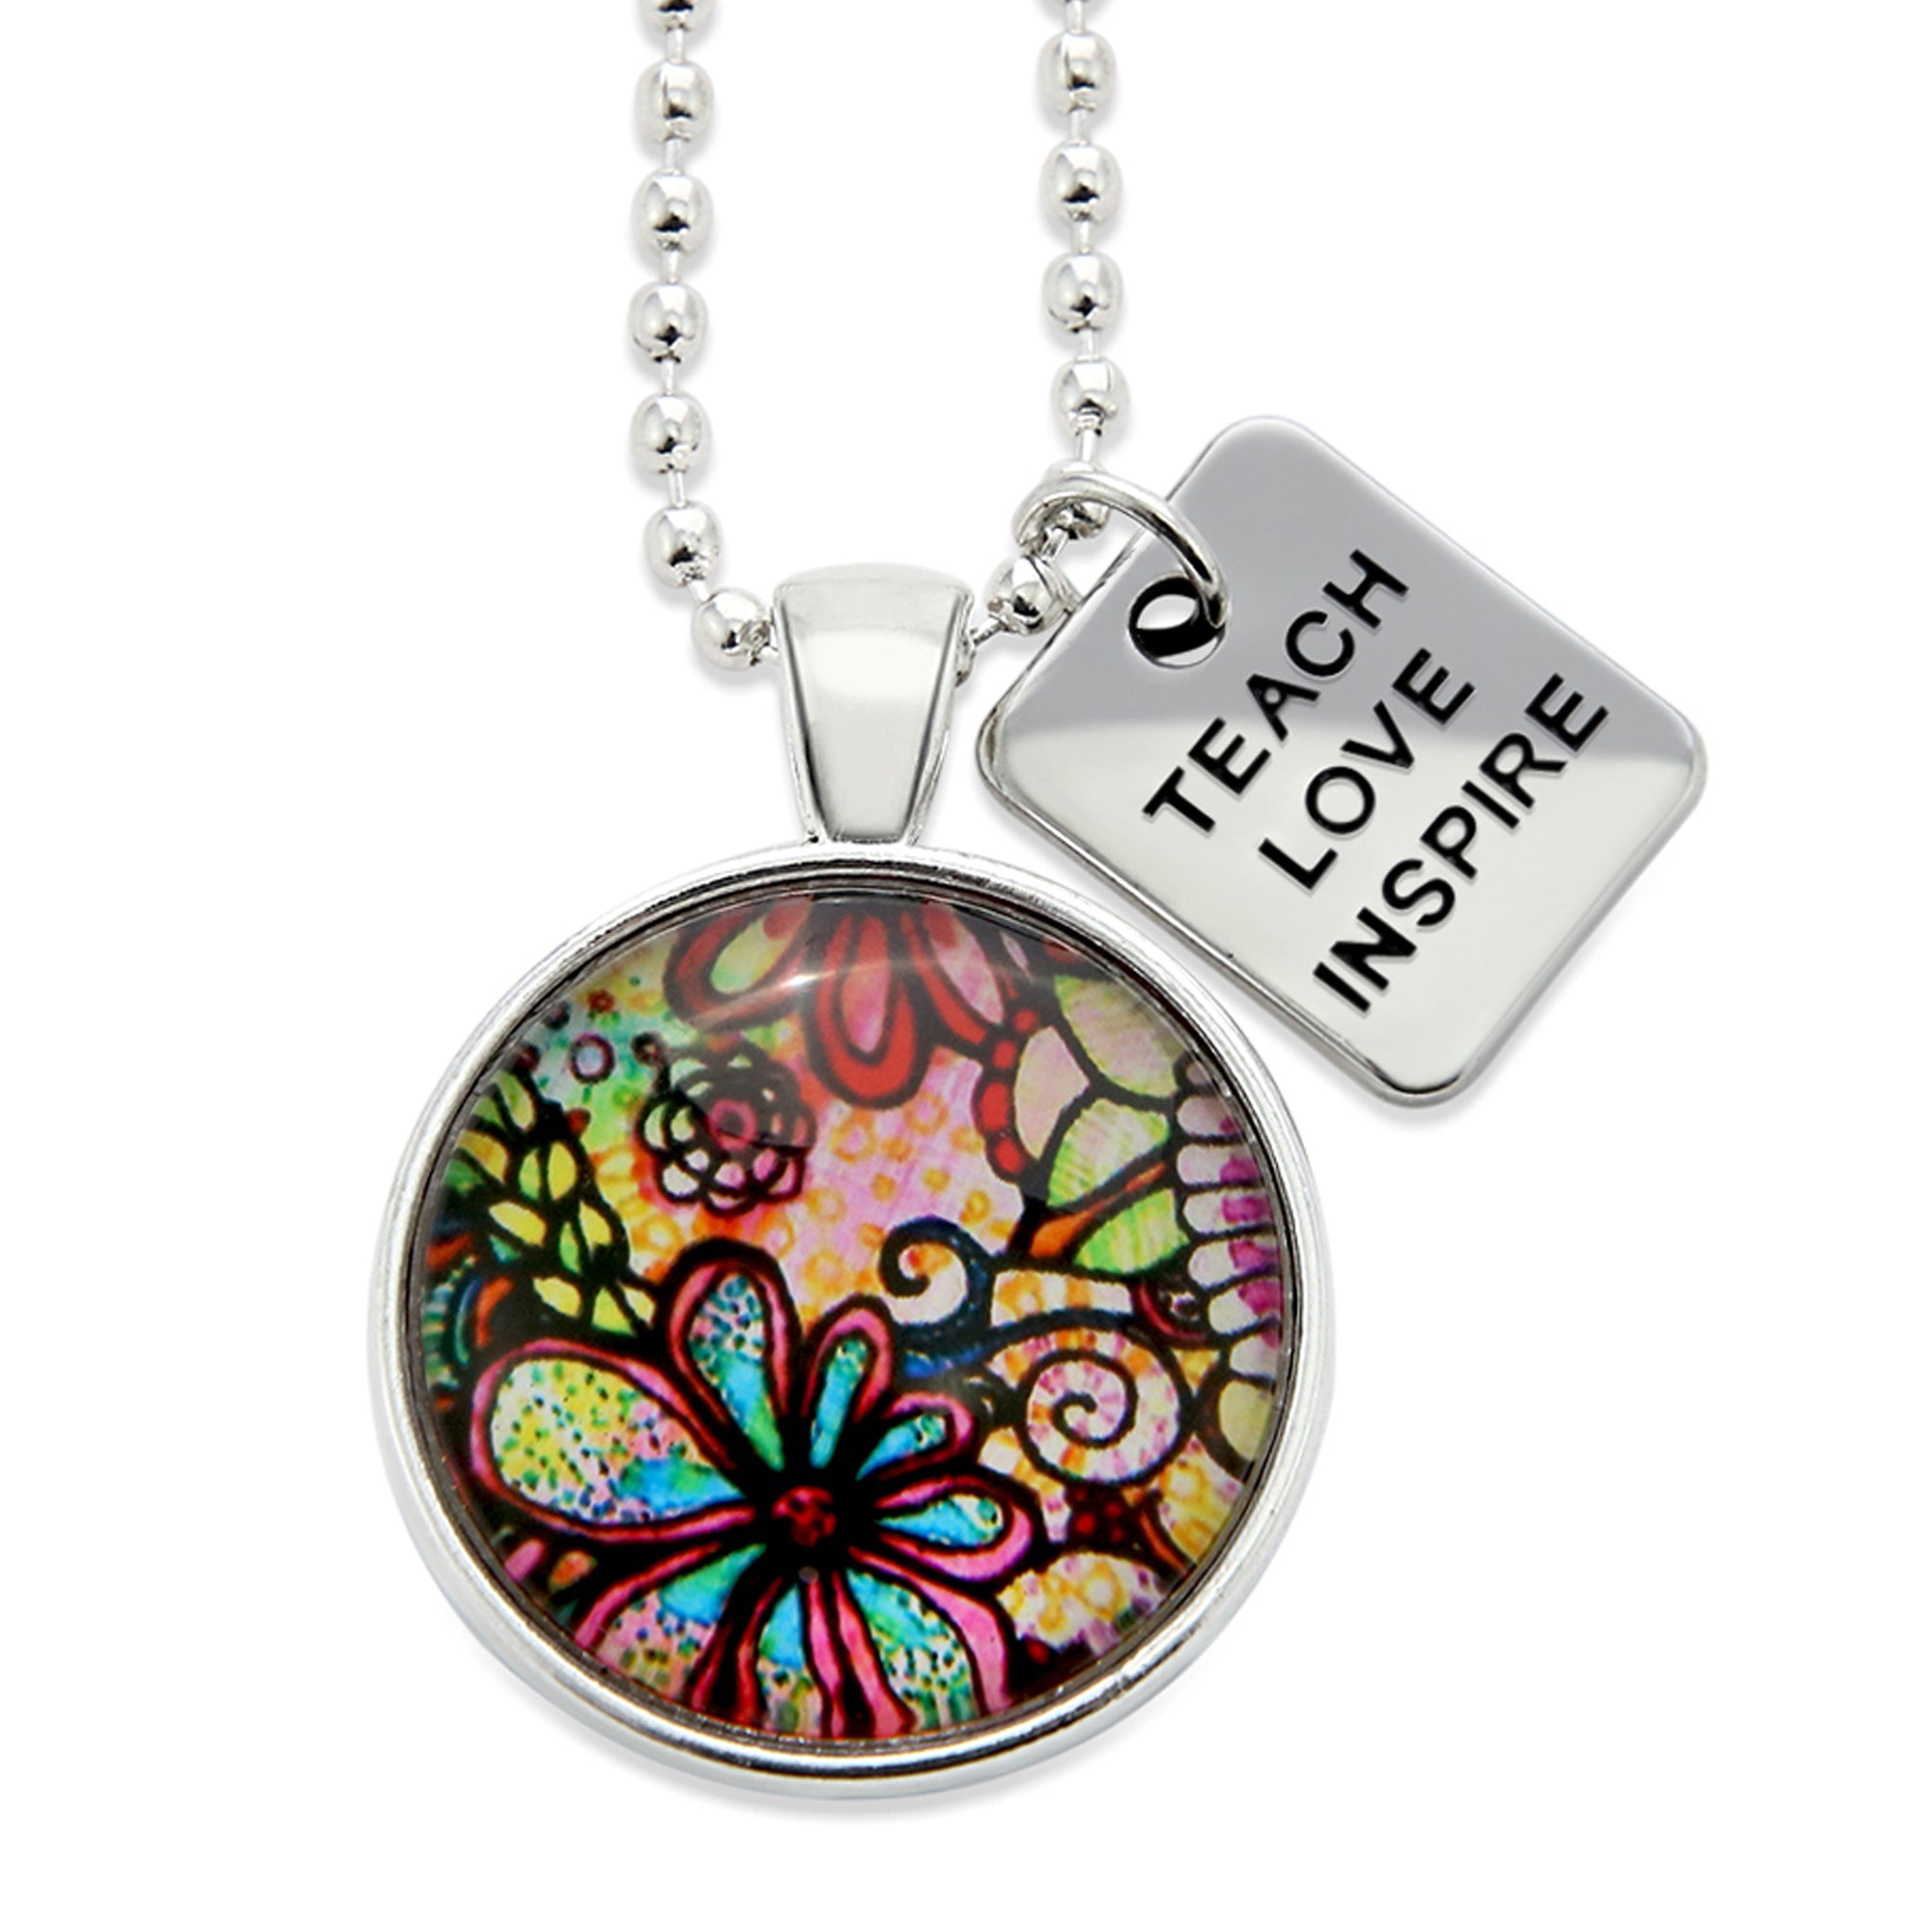 Heart & Soul Collection - Bright Silver 'TEACH LOVE INSPIRE' Necklace - Flora (10351)